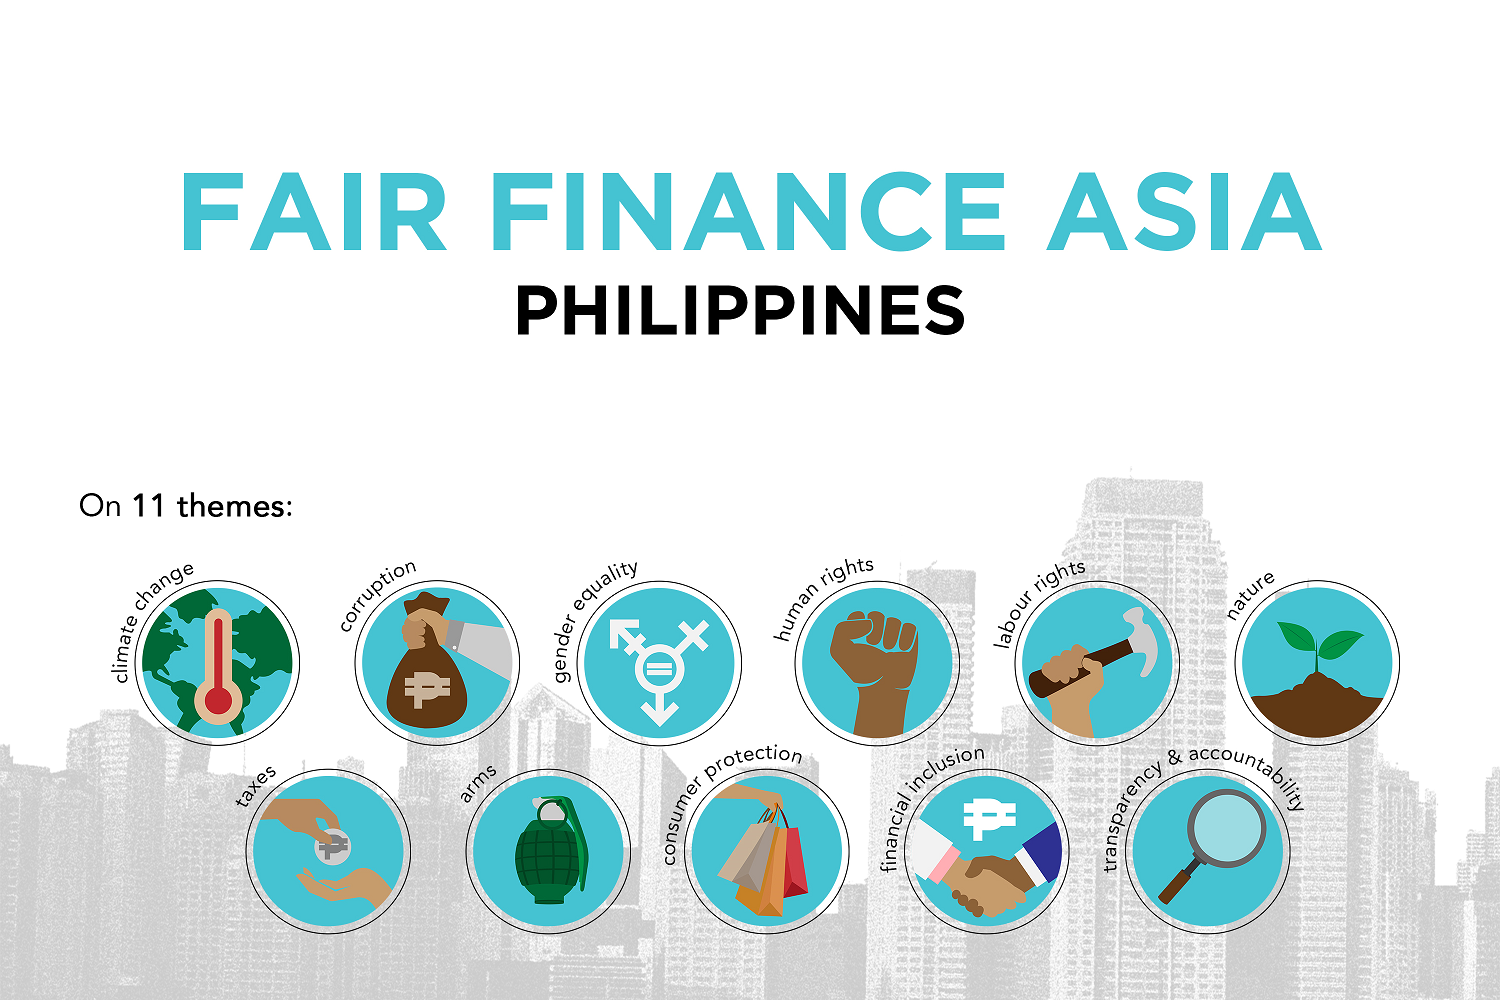 SUSTAINABLE FINANCE POLICY ASSESSMENTS OF BANKS IN THE PHILIPPINES